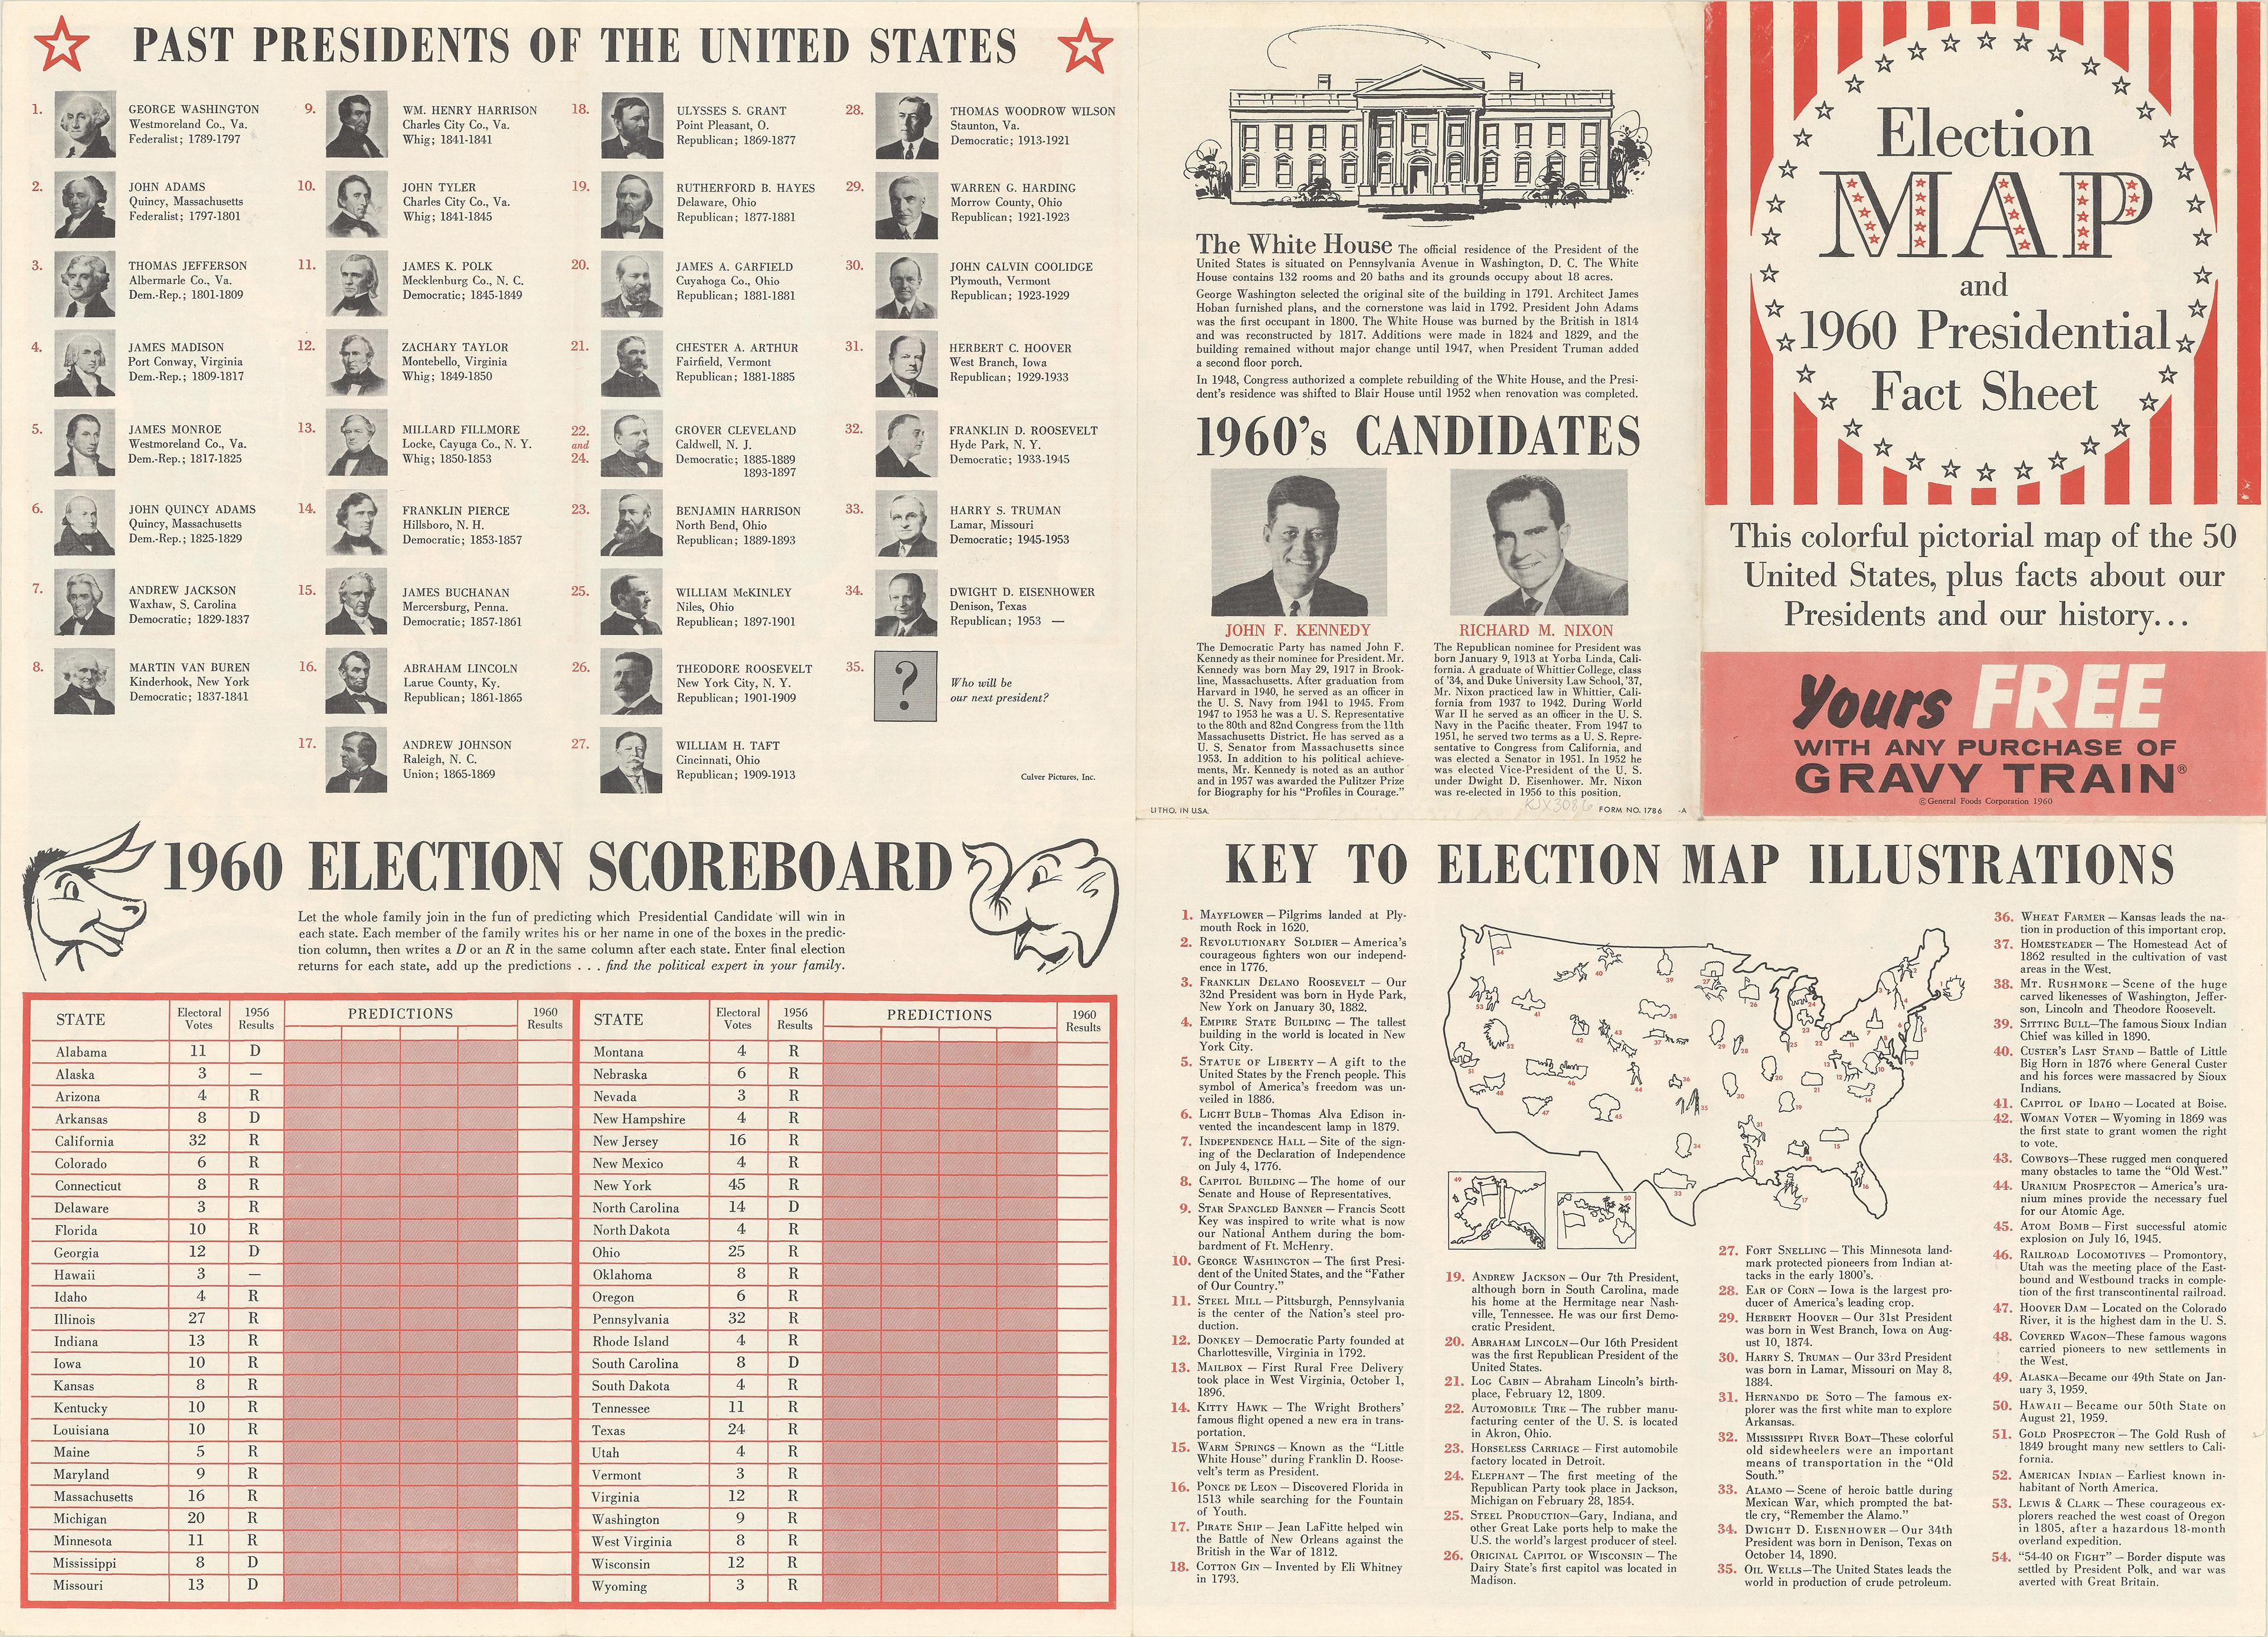 Title: “The 50 United States of America”

Subject: United States, Presidential Elections
Date: 1960 (dated)
Color: Printed Color
Size: 24.9 x 17.9 inches (63.2 x 45.5 cm)

This colorful map of the United States was drawn by Lorin Thompson and